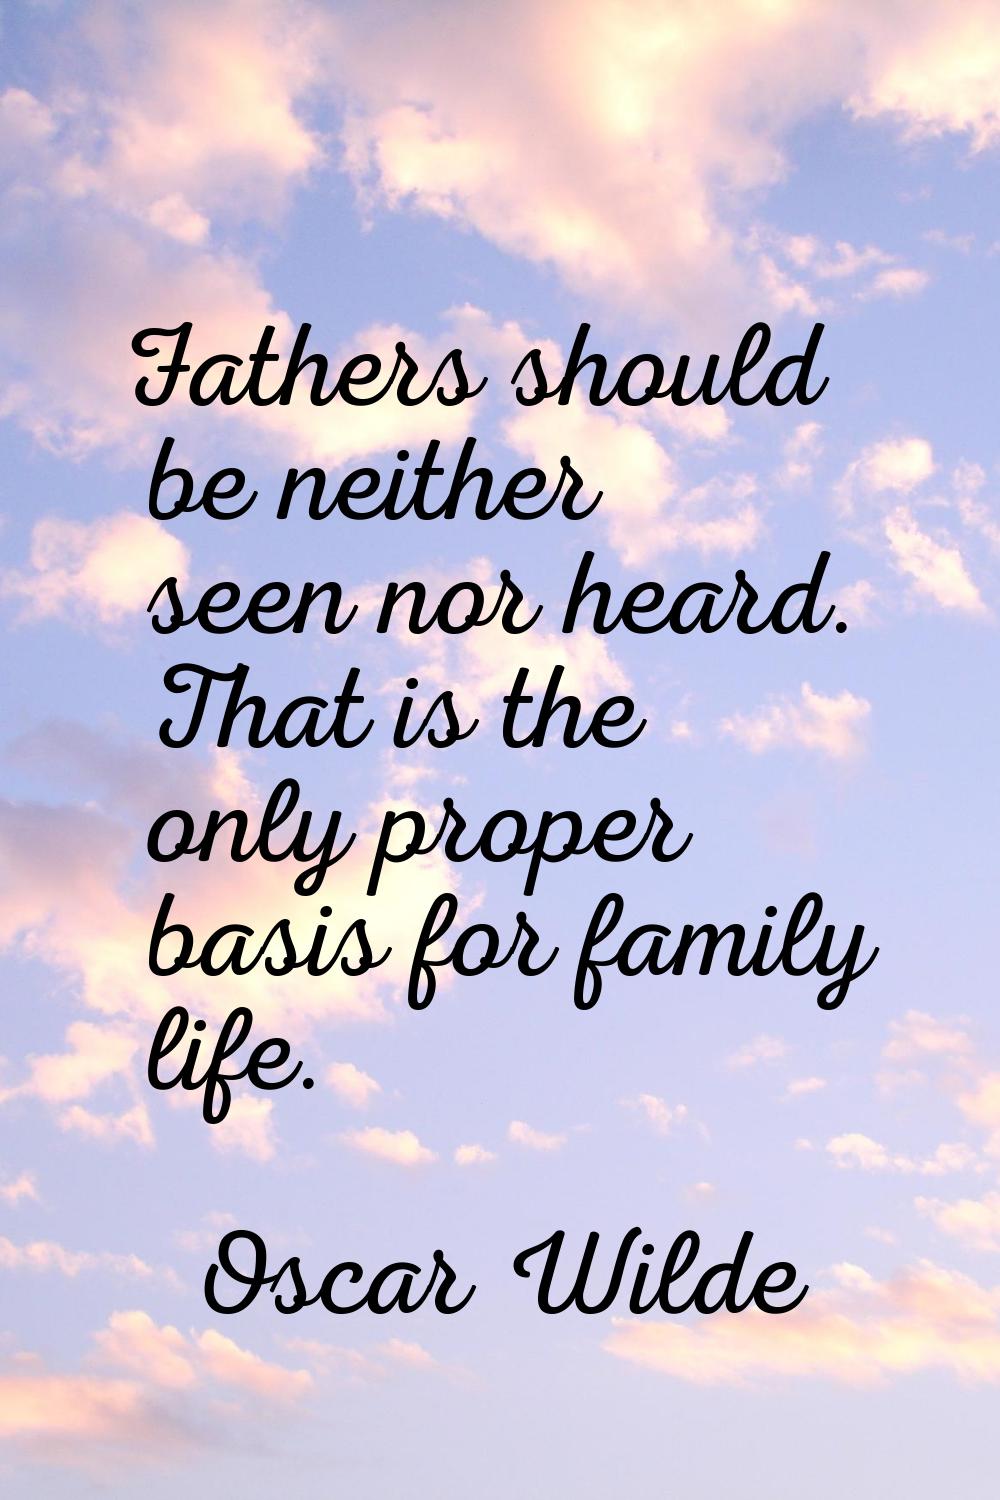 Fathers should be neither seen nor heard. That is the only proper basis for family life.